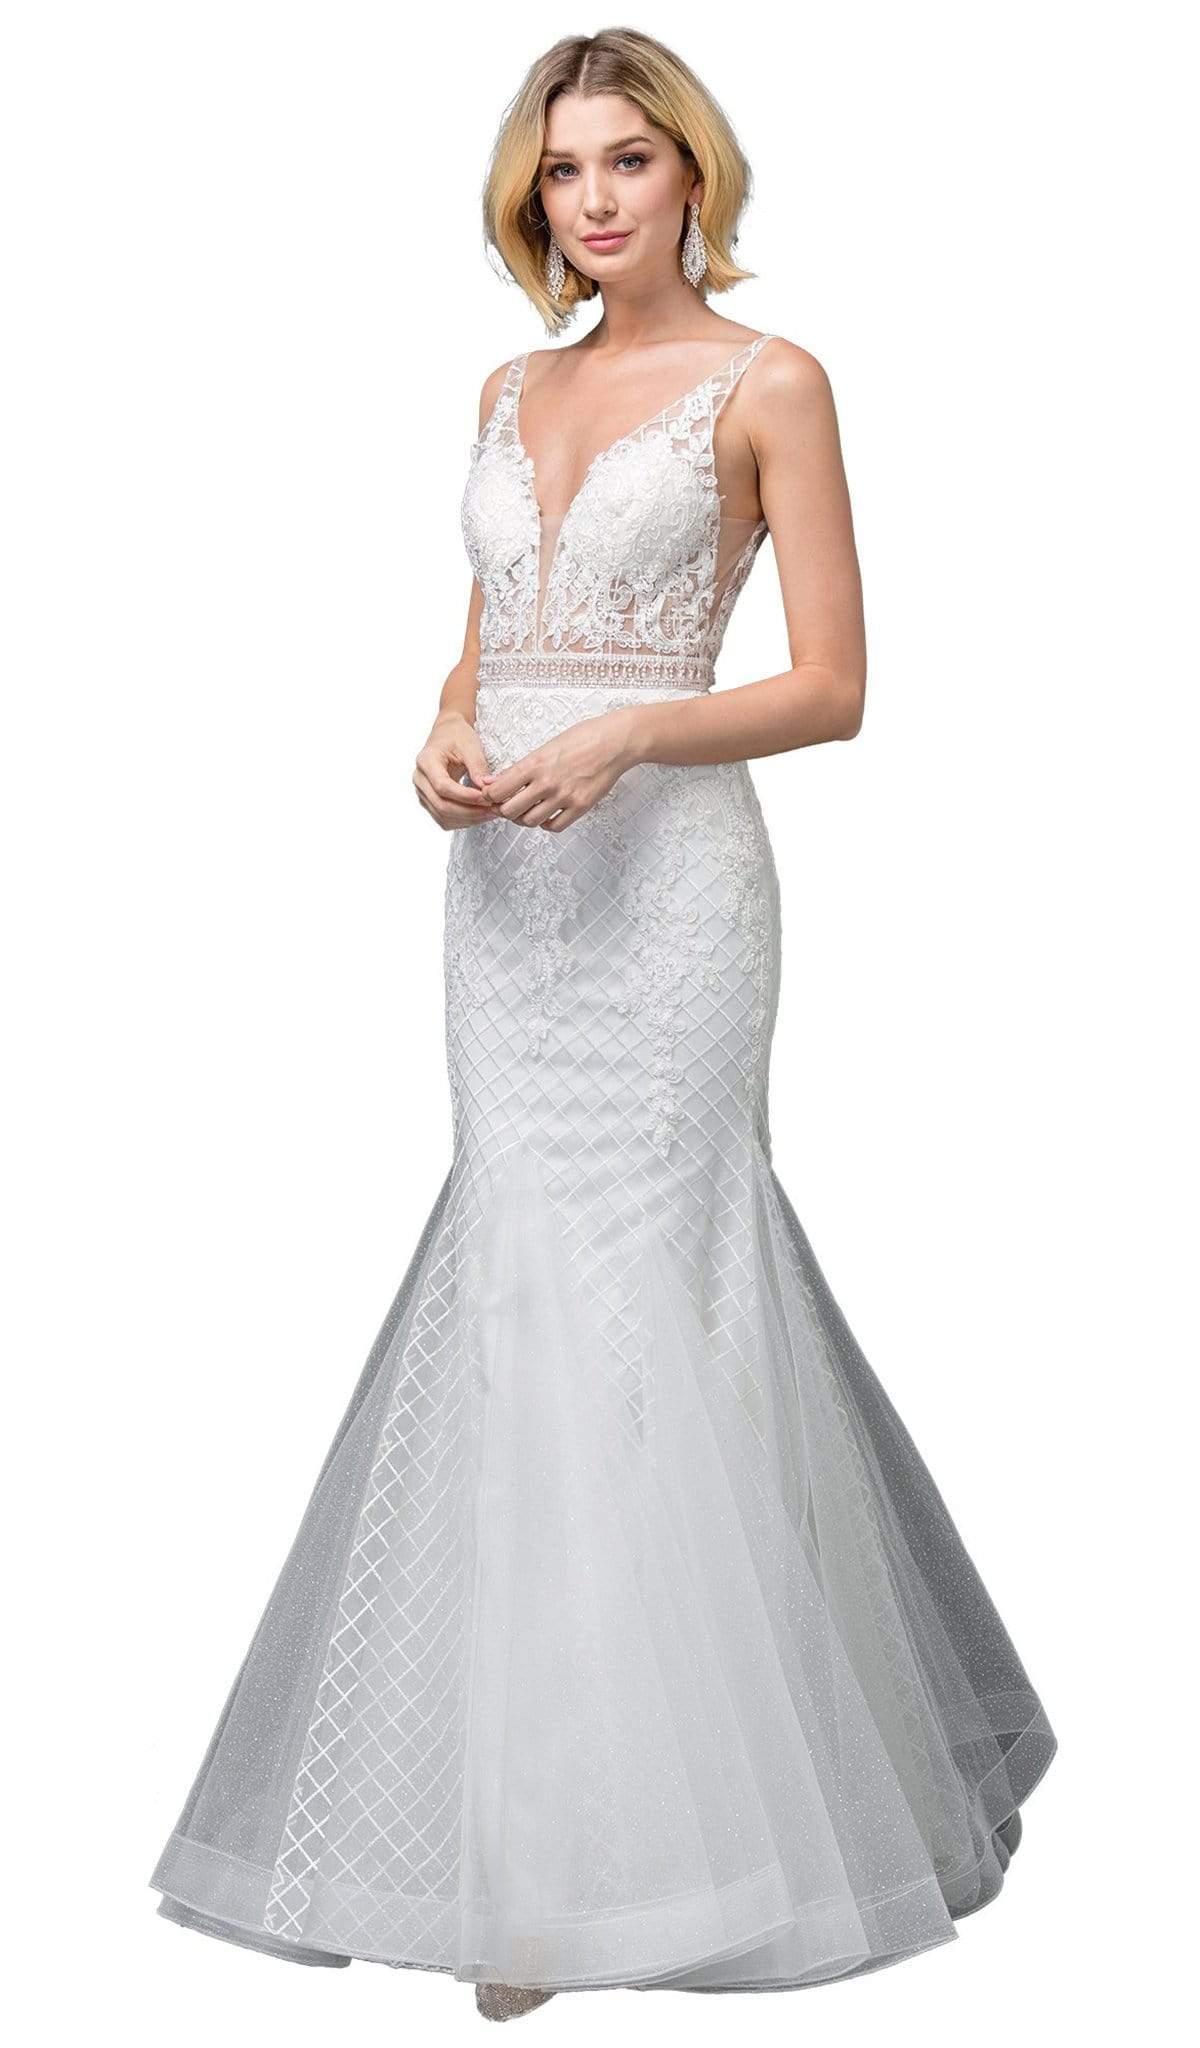 Dancing Queen Bridal - 123 Embroidered Deep V-neck Mermaid Dress
